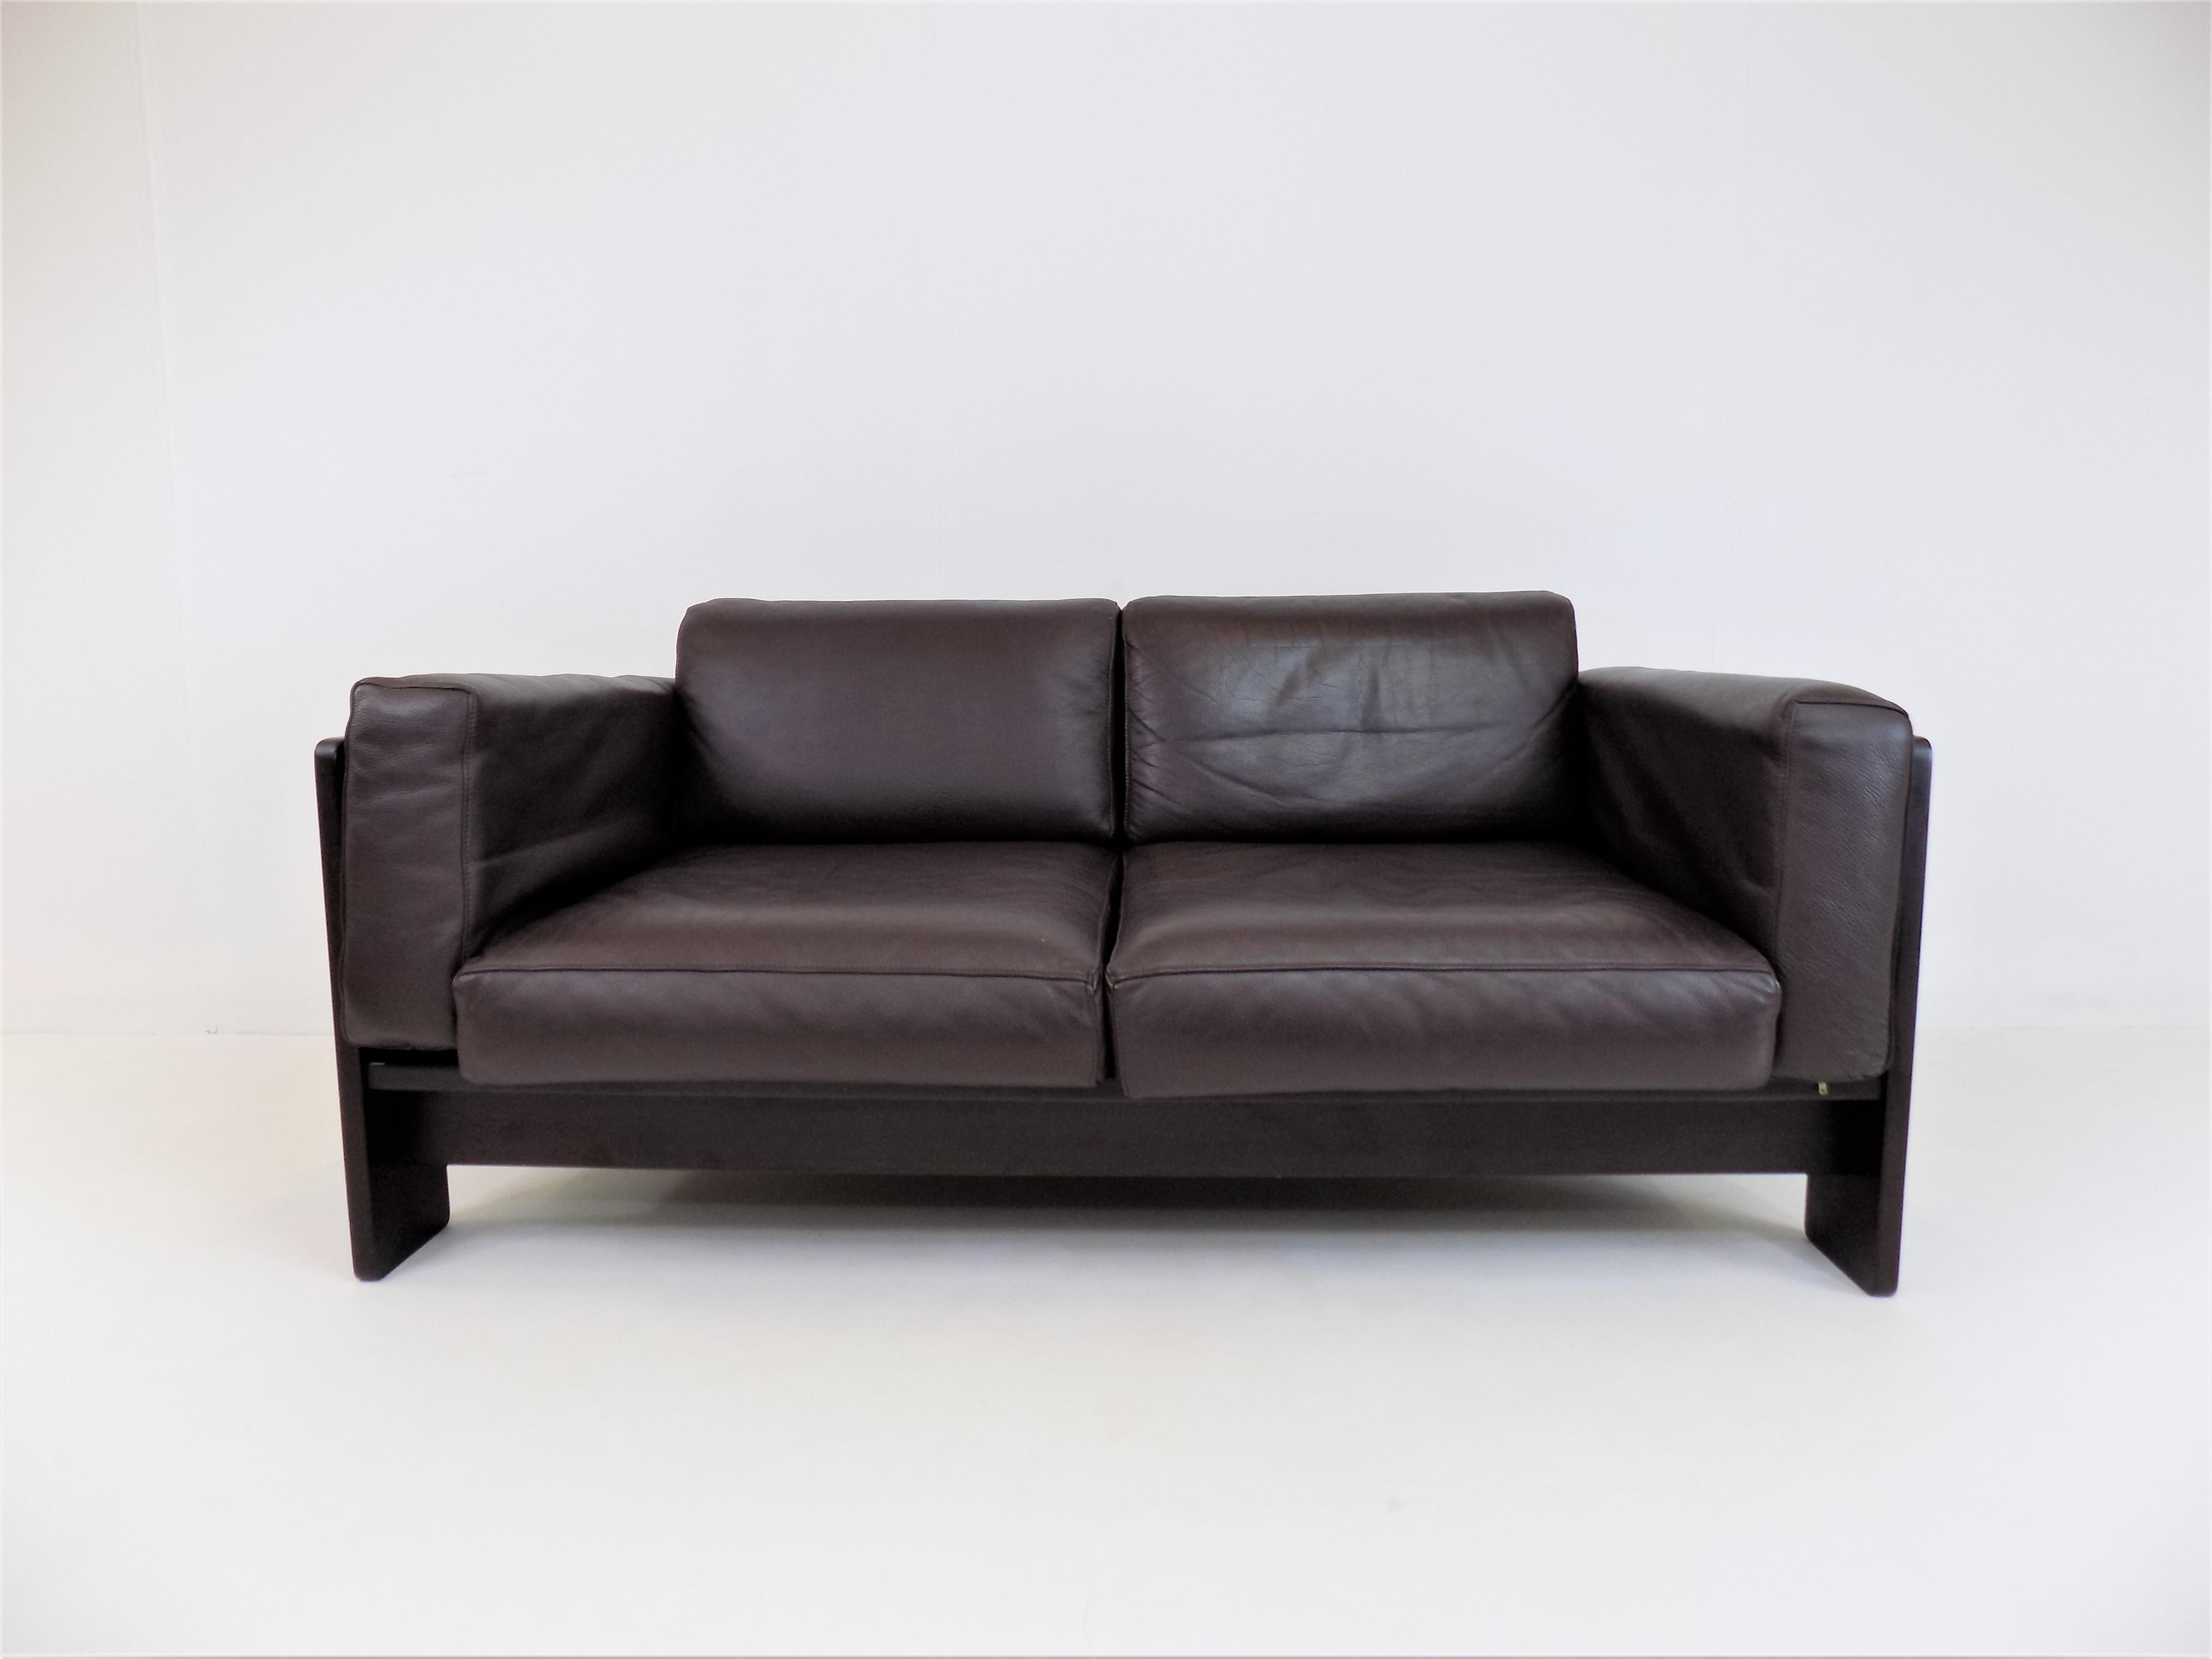 This dark brown wood and brown leather two seater sofa is in excellent condition. The wooden frame, which is almost black, harmonizes very nicely with the slightly lighter brown tone of the leather. The soft leather comes in almost new condition,